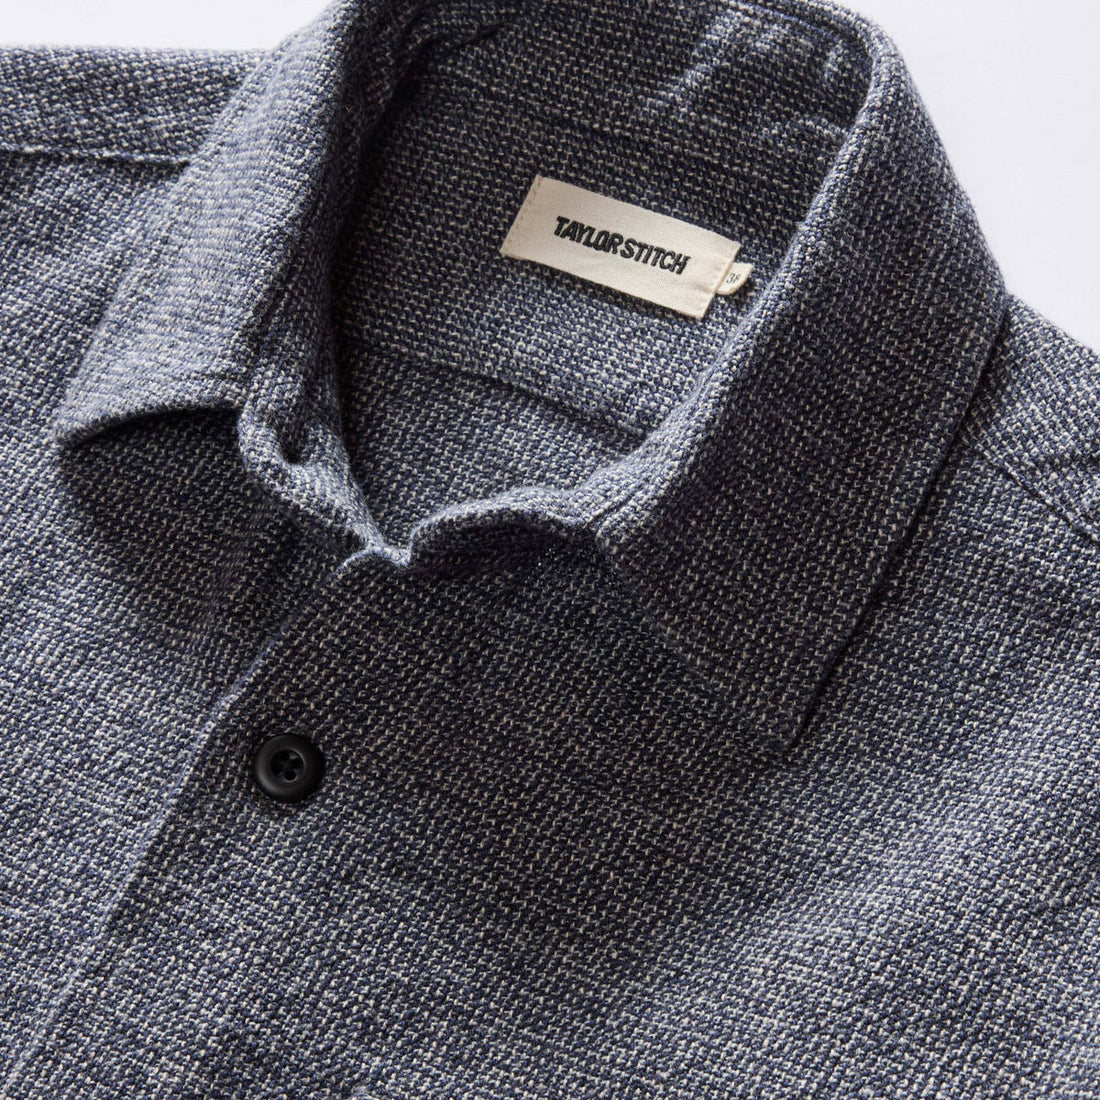 Taylor Stitch - The Point Shirt in Heather Blue Linen Tweed